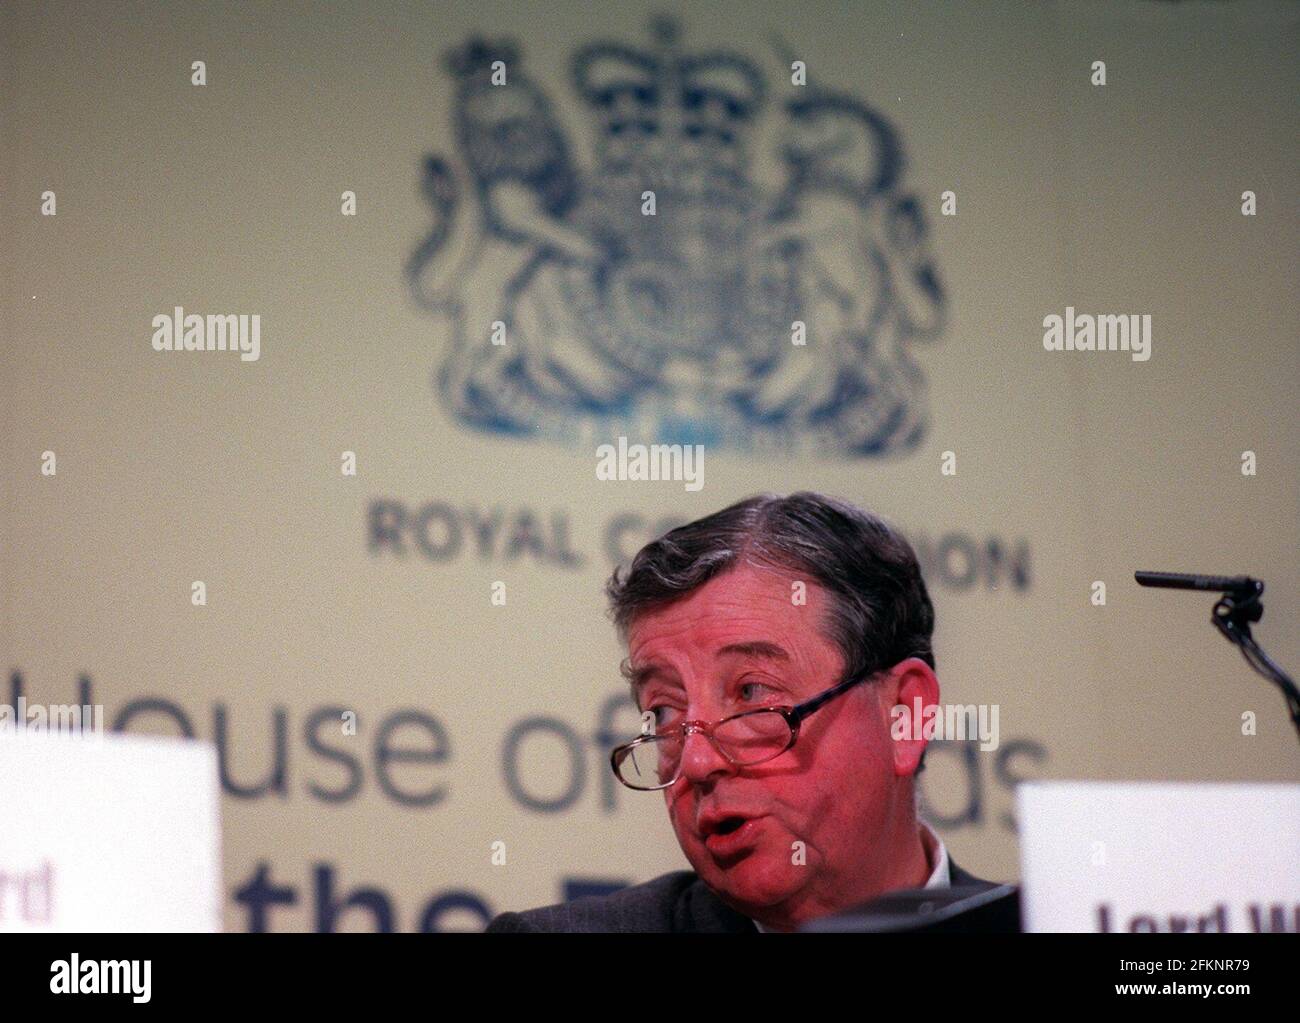 Lord Wakeham January 2000 Chairman of the Royal Commission into reform of the upper house - The House Of Lords - speaking at news press conference presenting report at Church House Stock Photo